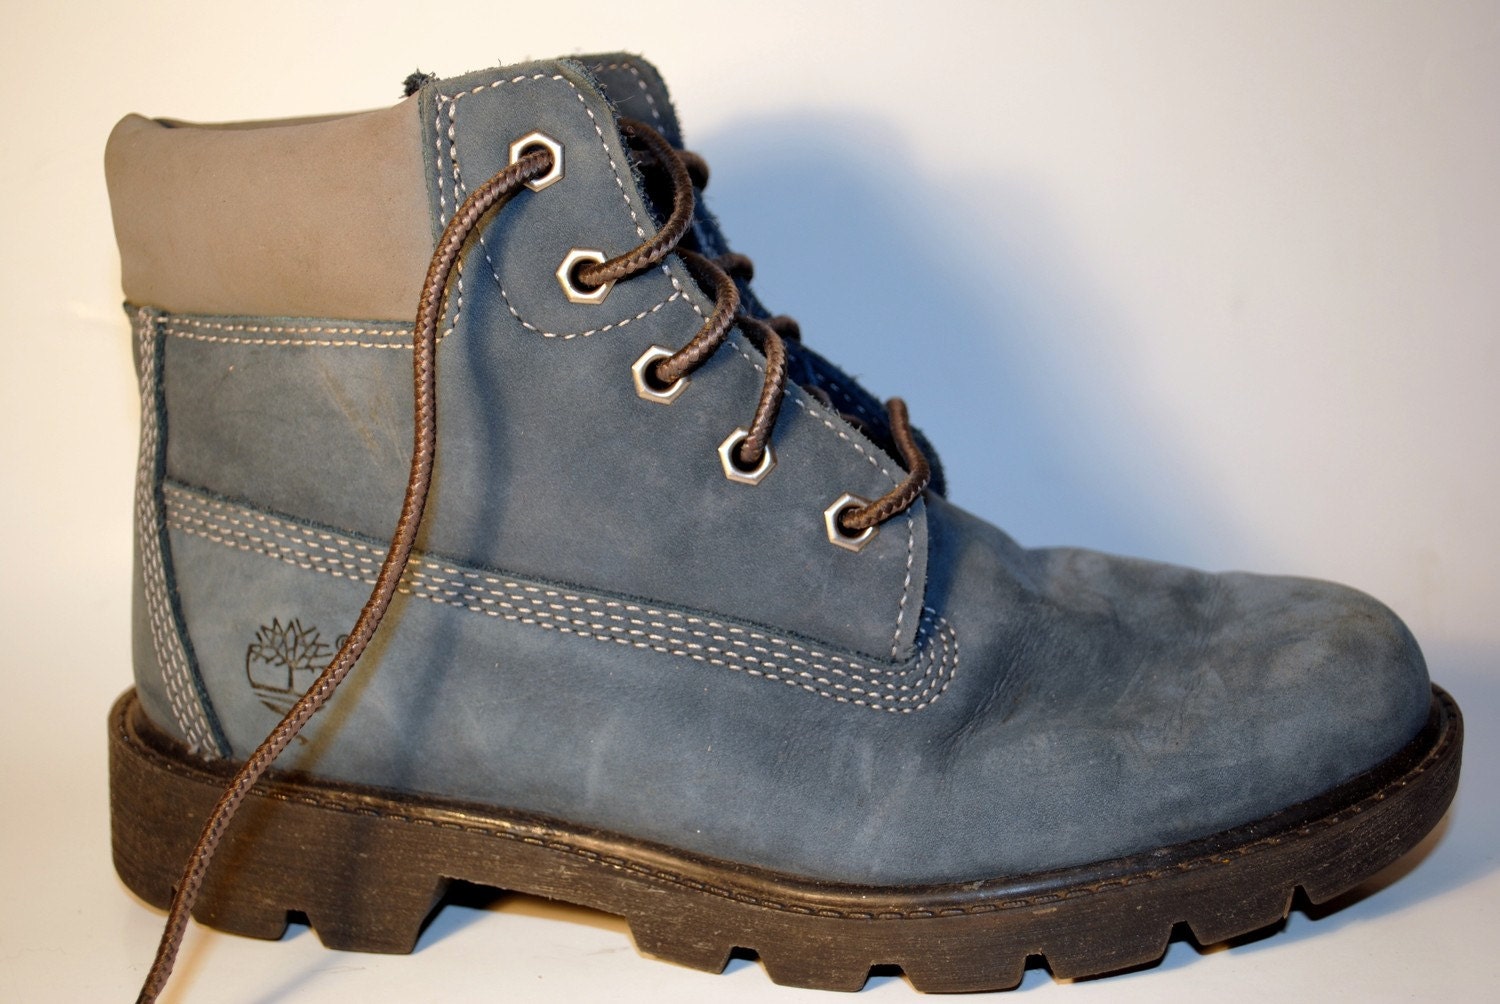 Vintage blue suede Timberland hiking boots Size 8